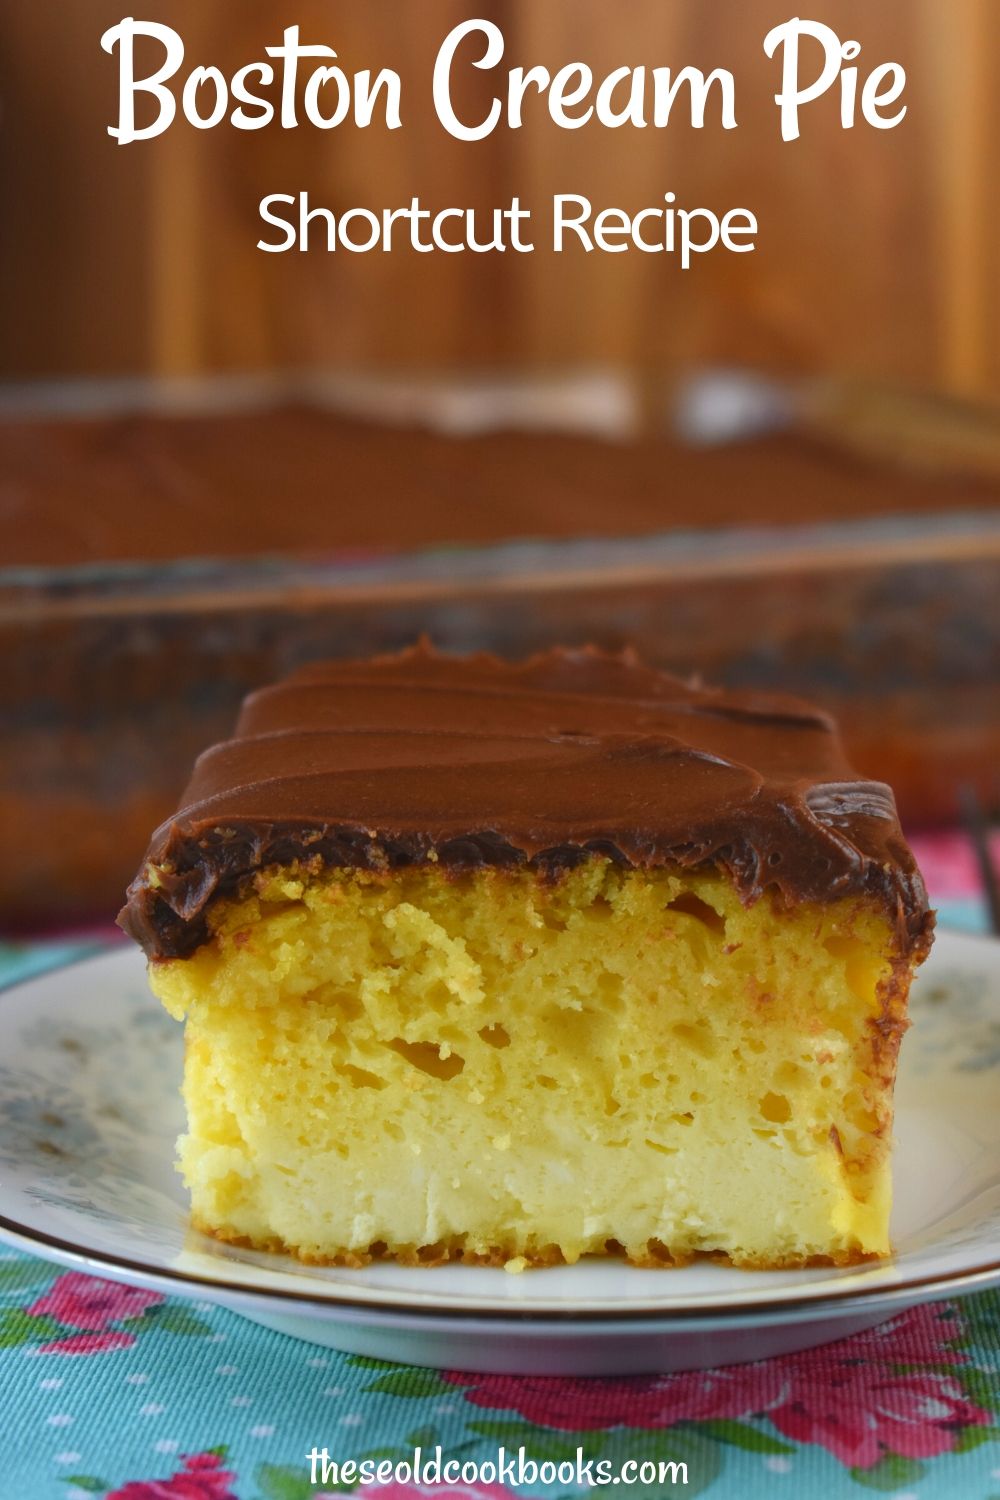 Granny's Boston Cream Cake is a shortcut recipe for your beloved Boston Cream Pie.  Topped with chocolate fudge icing, a yellow cake mix is taken to a whole new level with a decadent cream cheese layer.